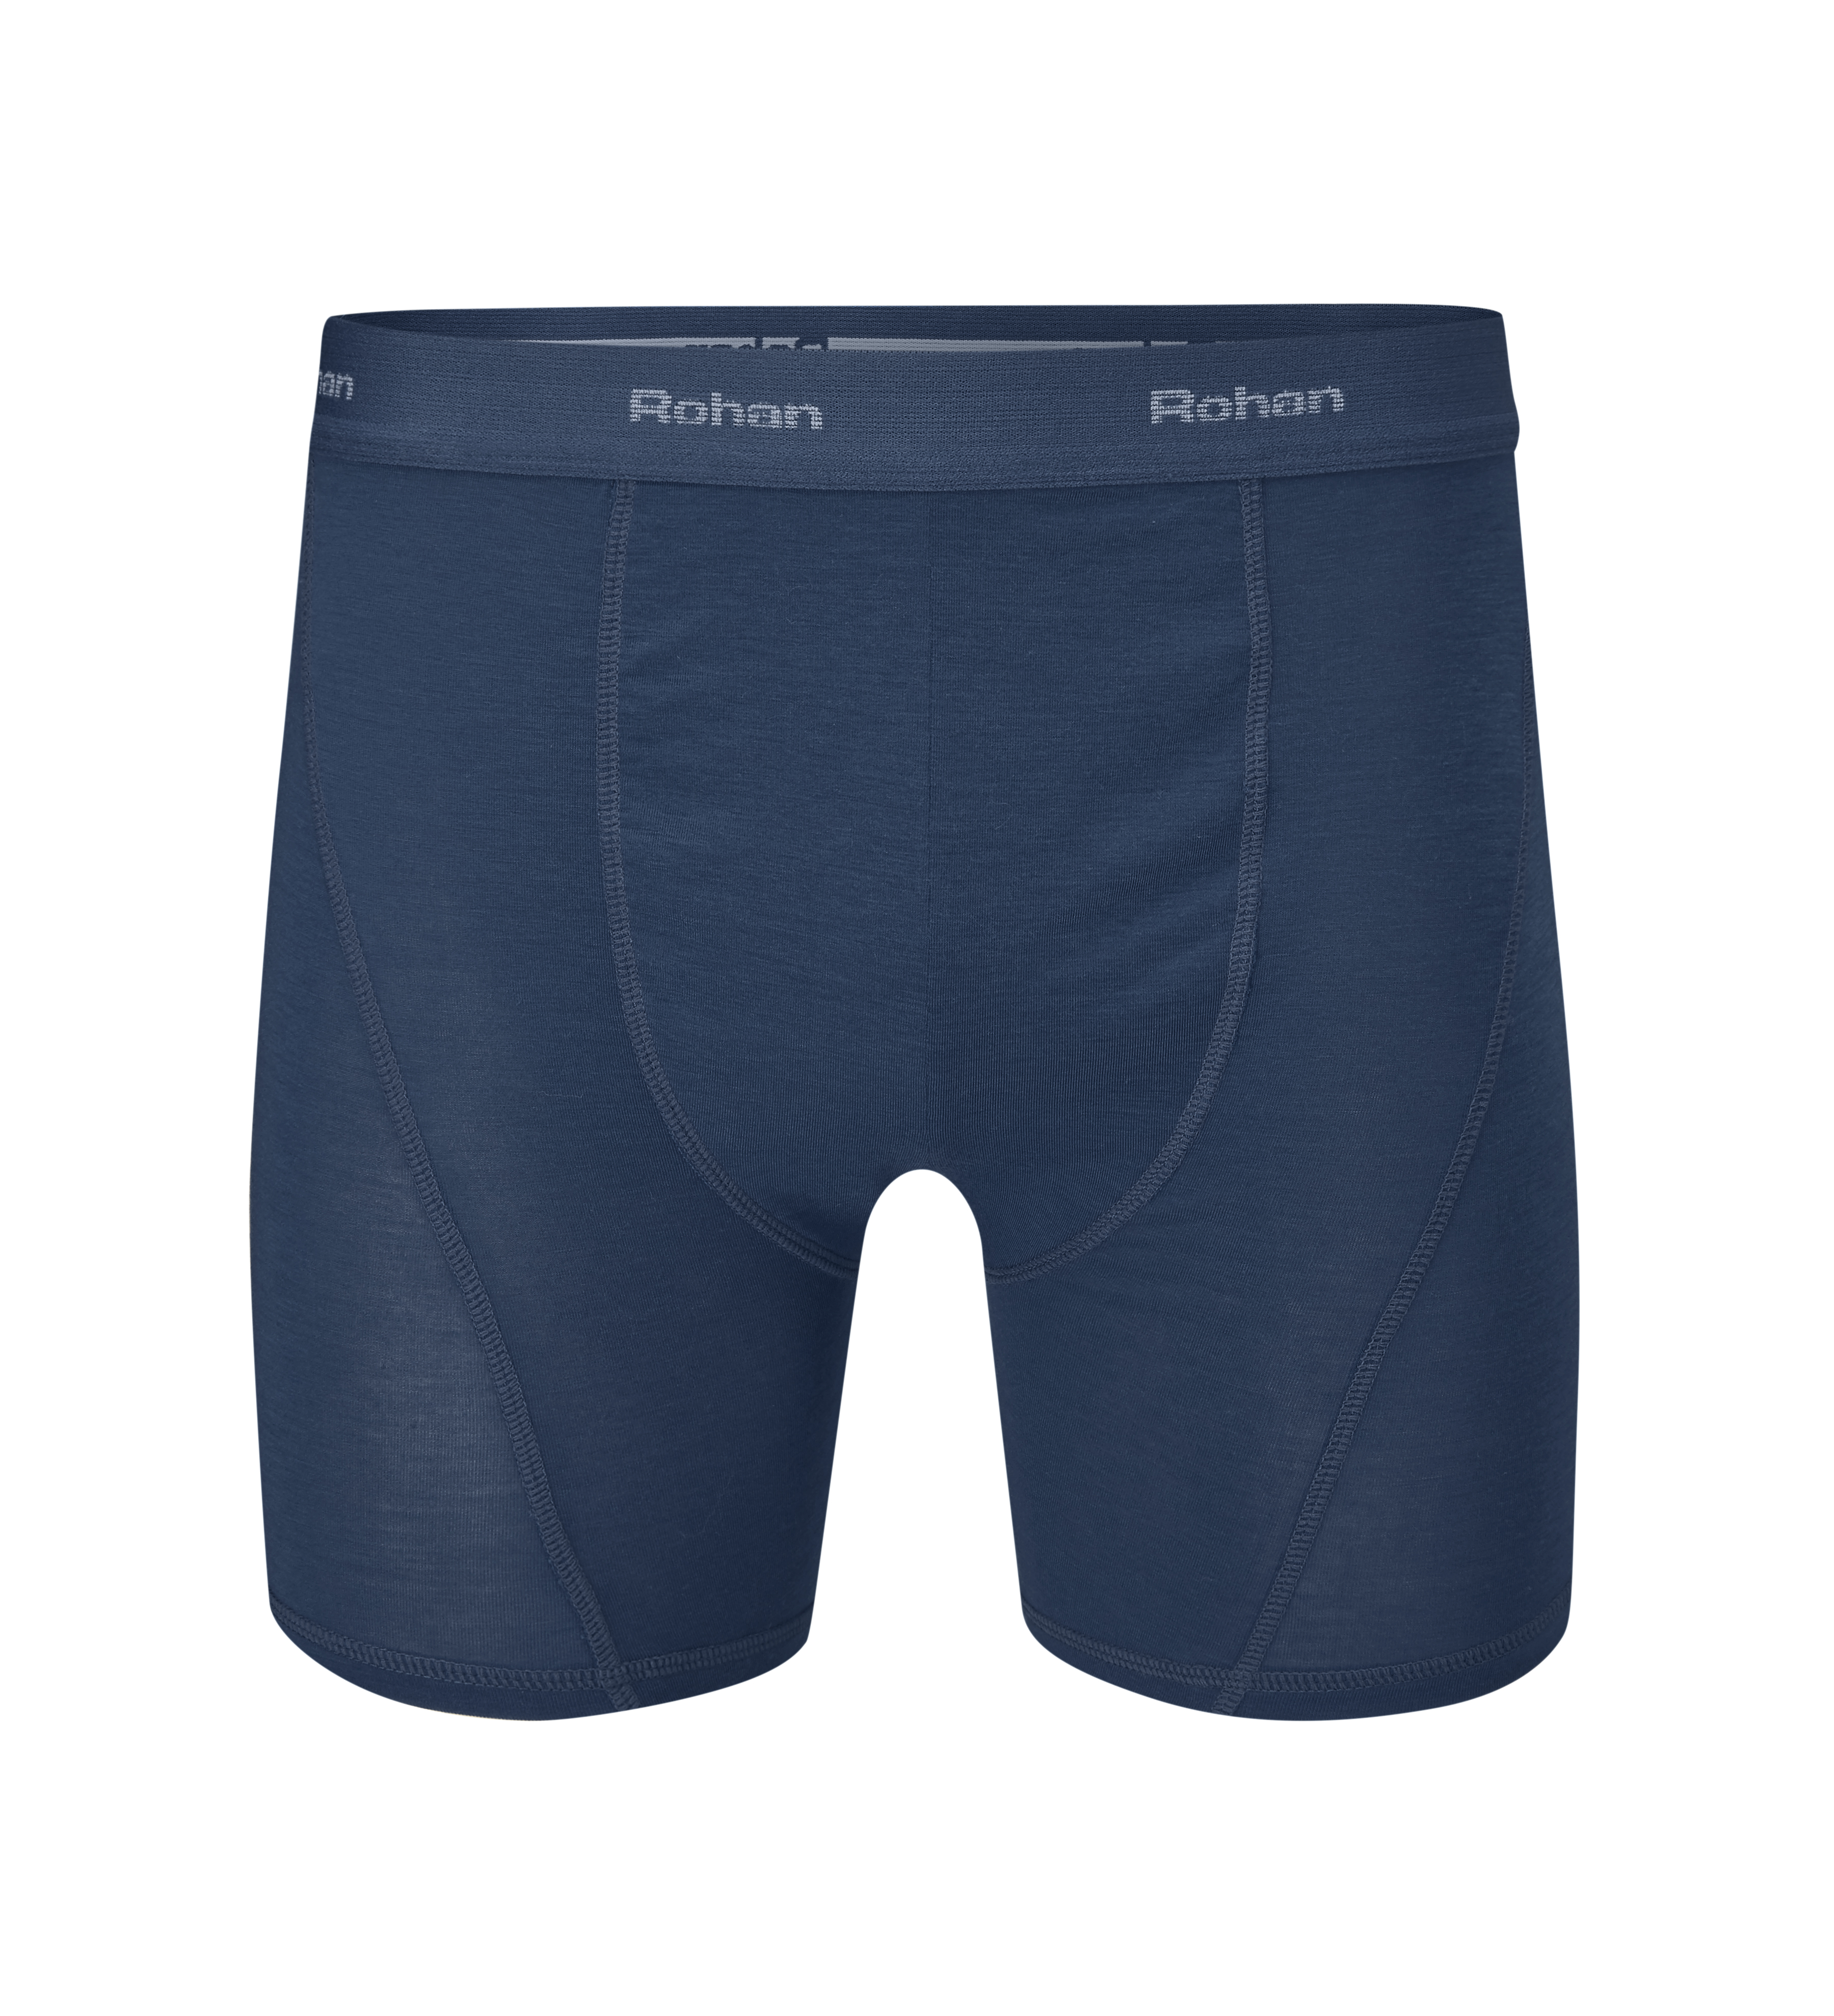 Men’s Aether Boxer Shorts